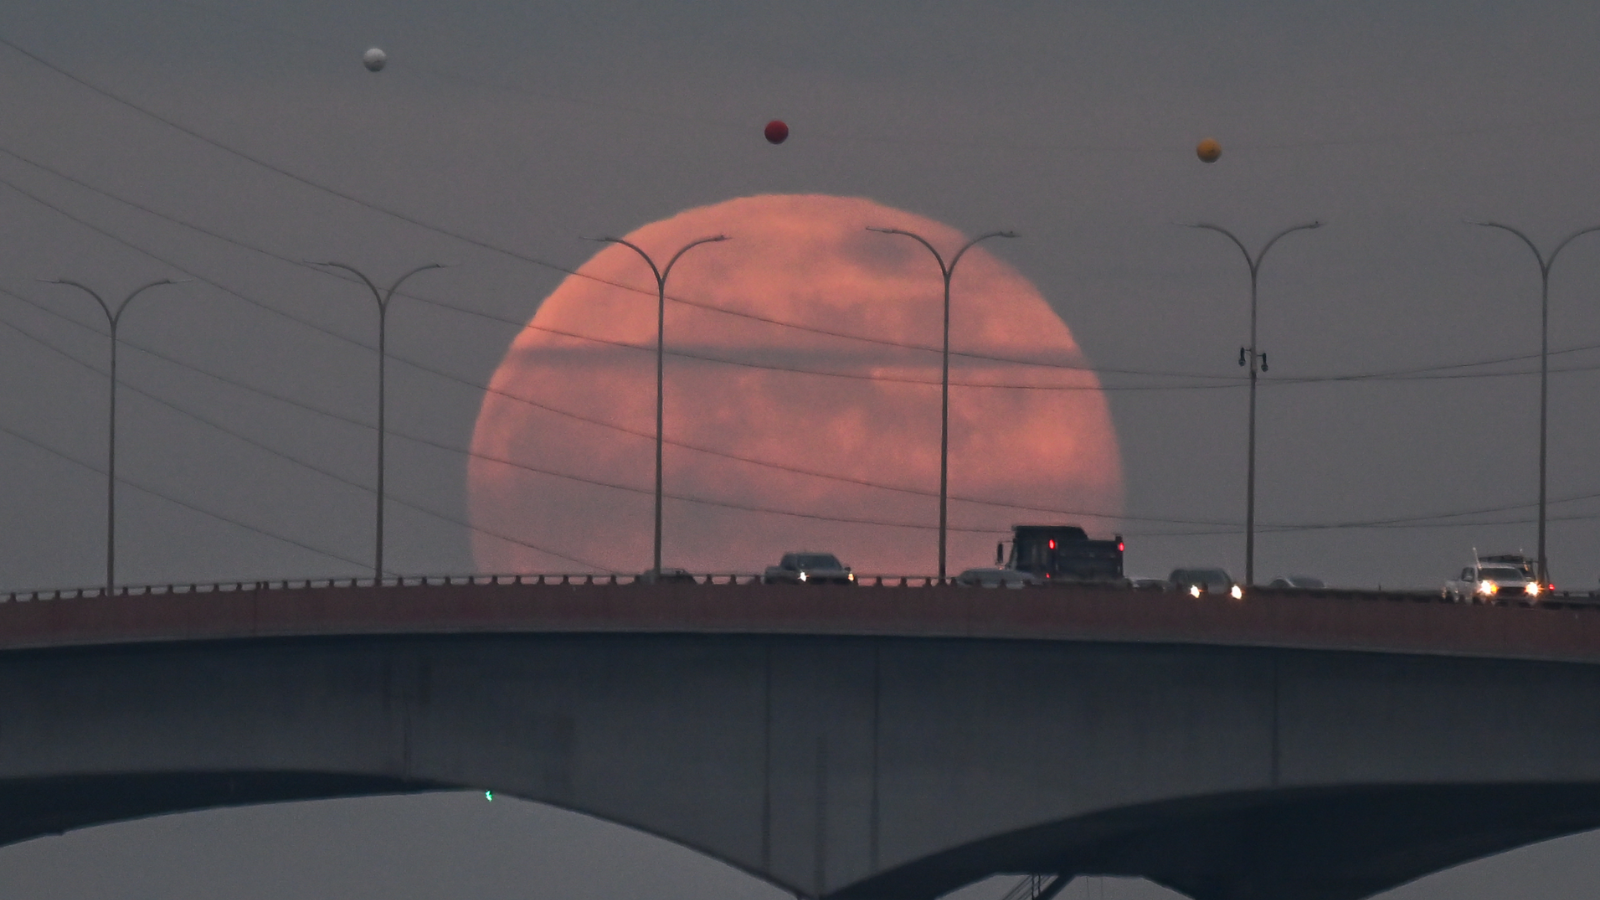 A red moon rises behind a bridge with traffic